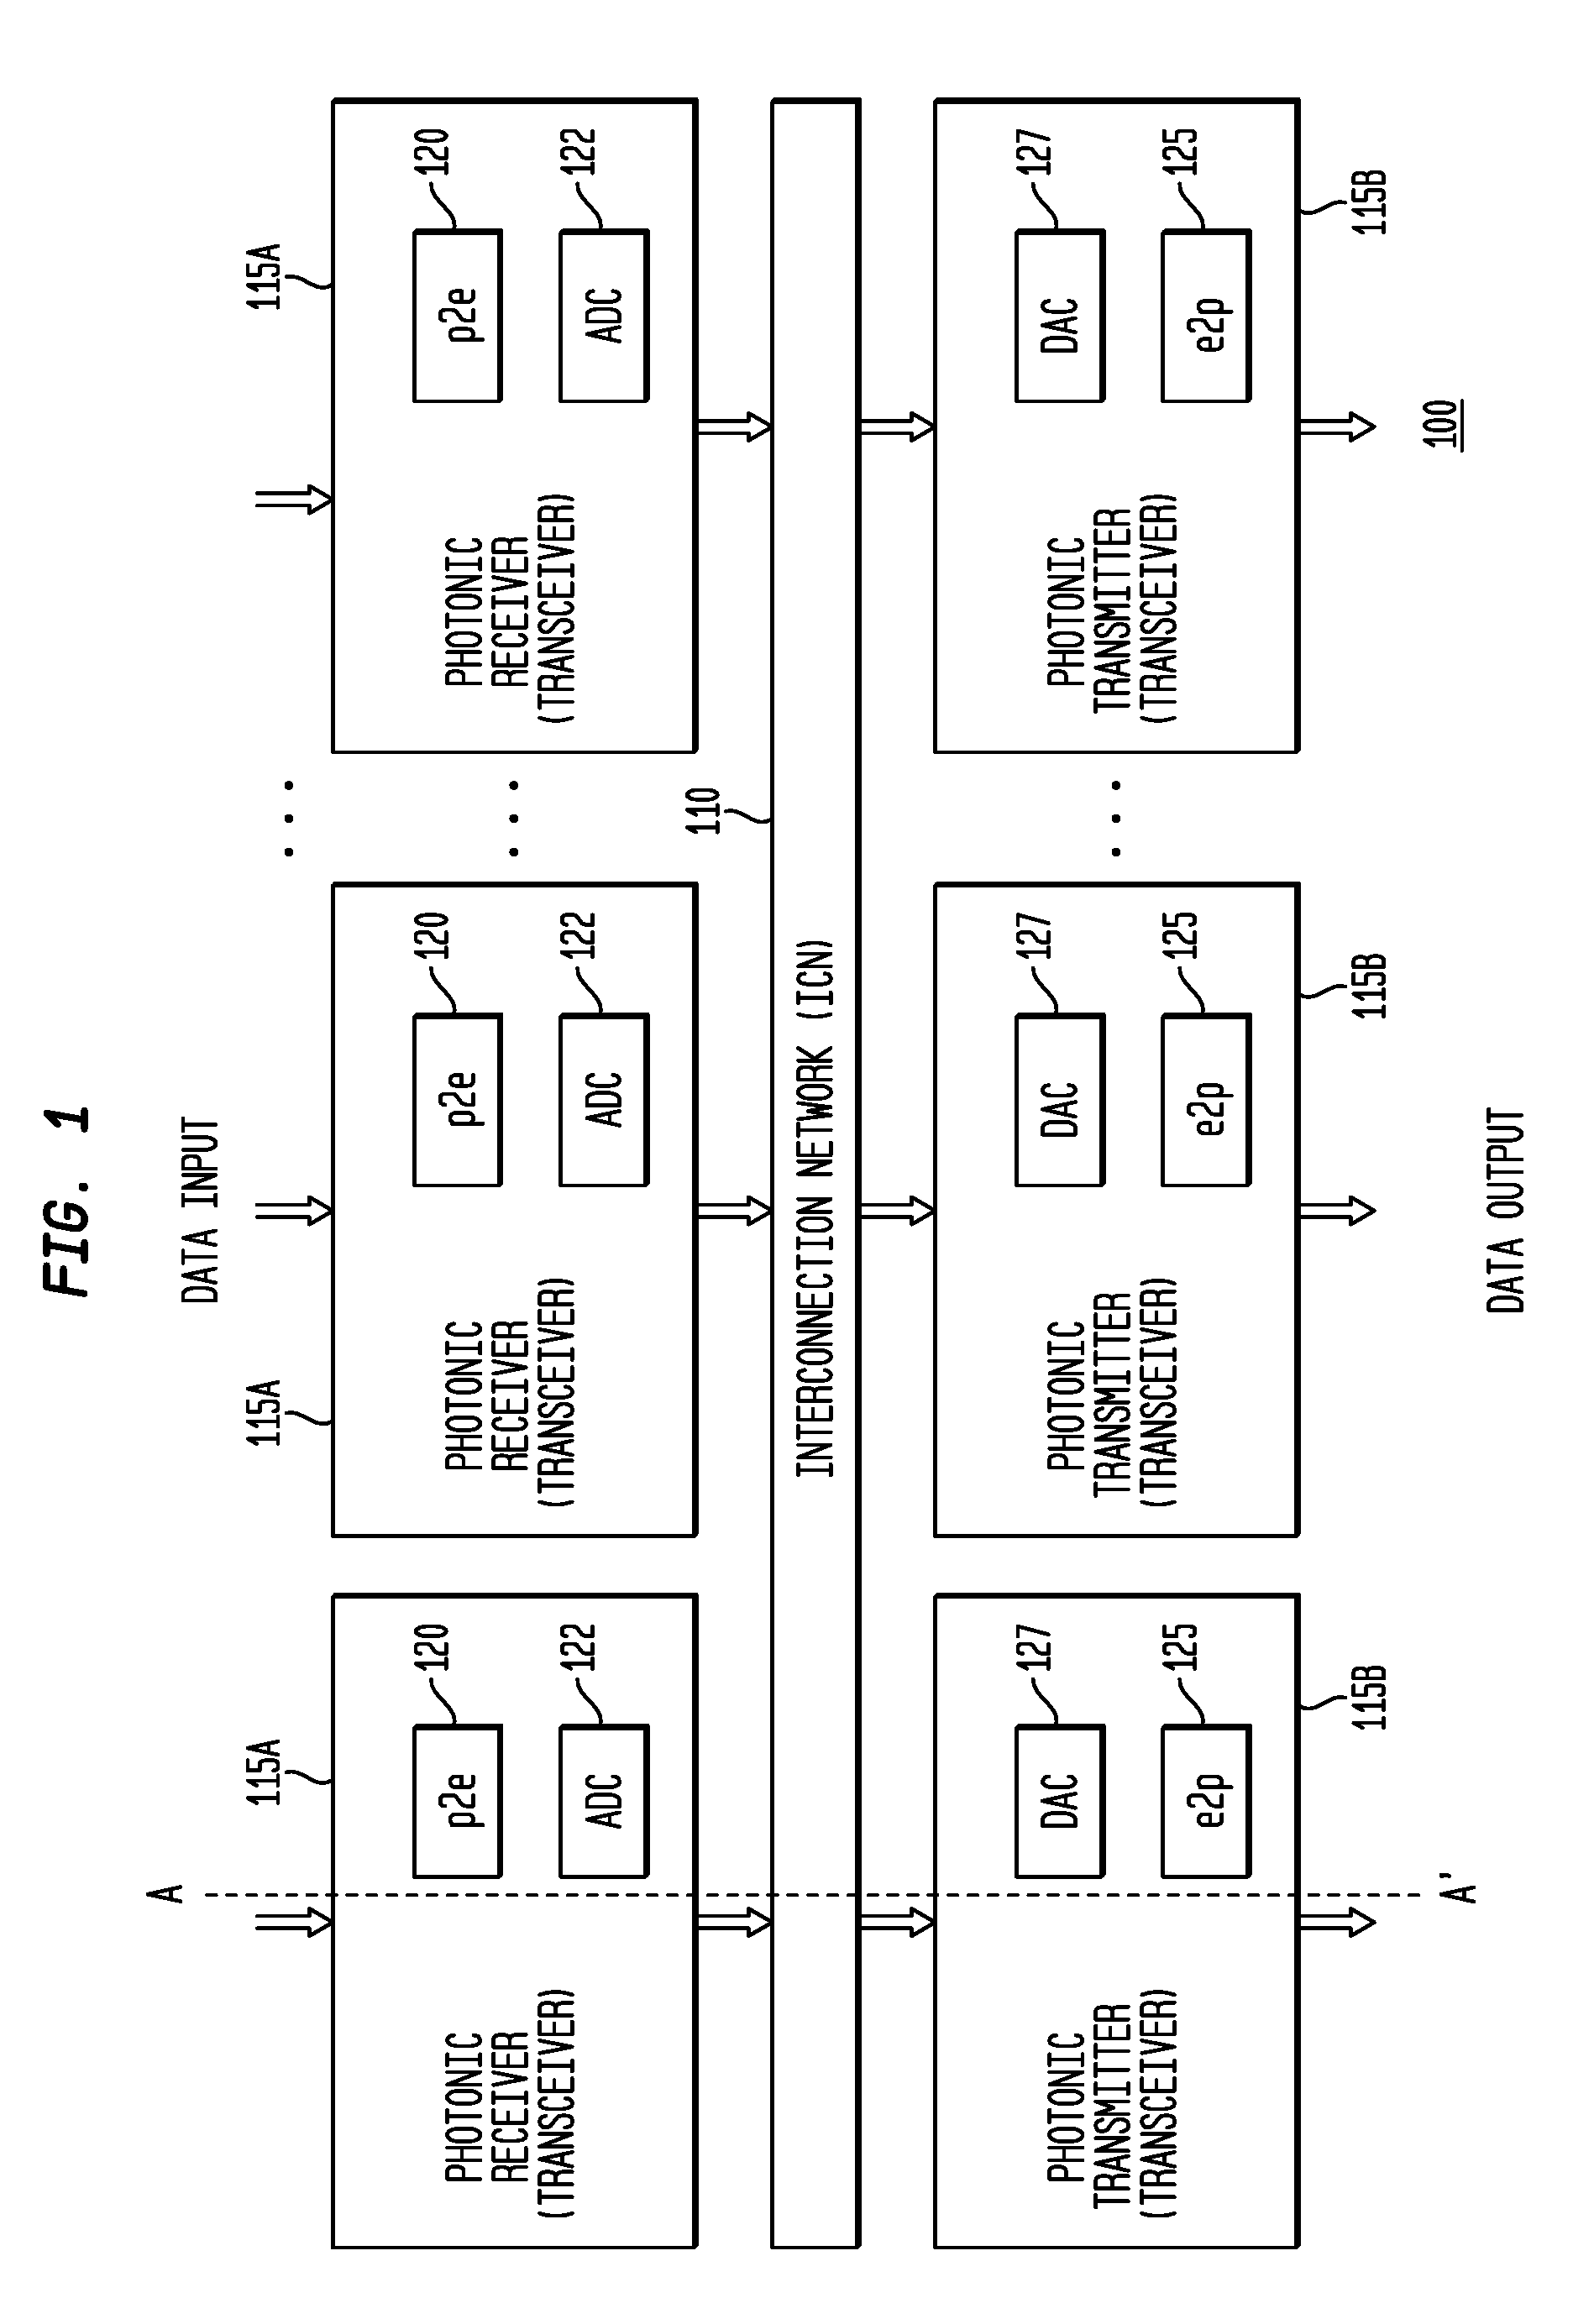 3D VLSI  Interconnection Network with Microfluidic Cooling, Photonics and Parallel Processing Architecture